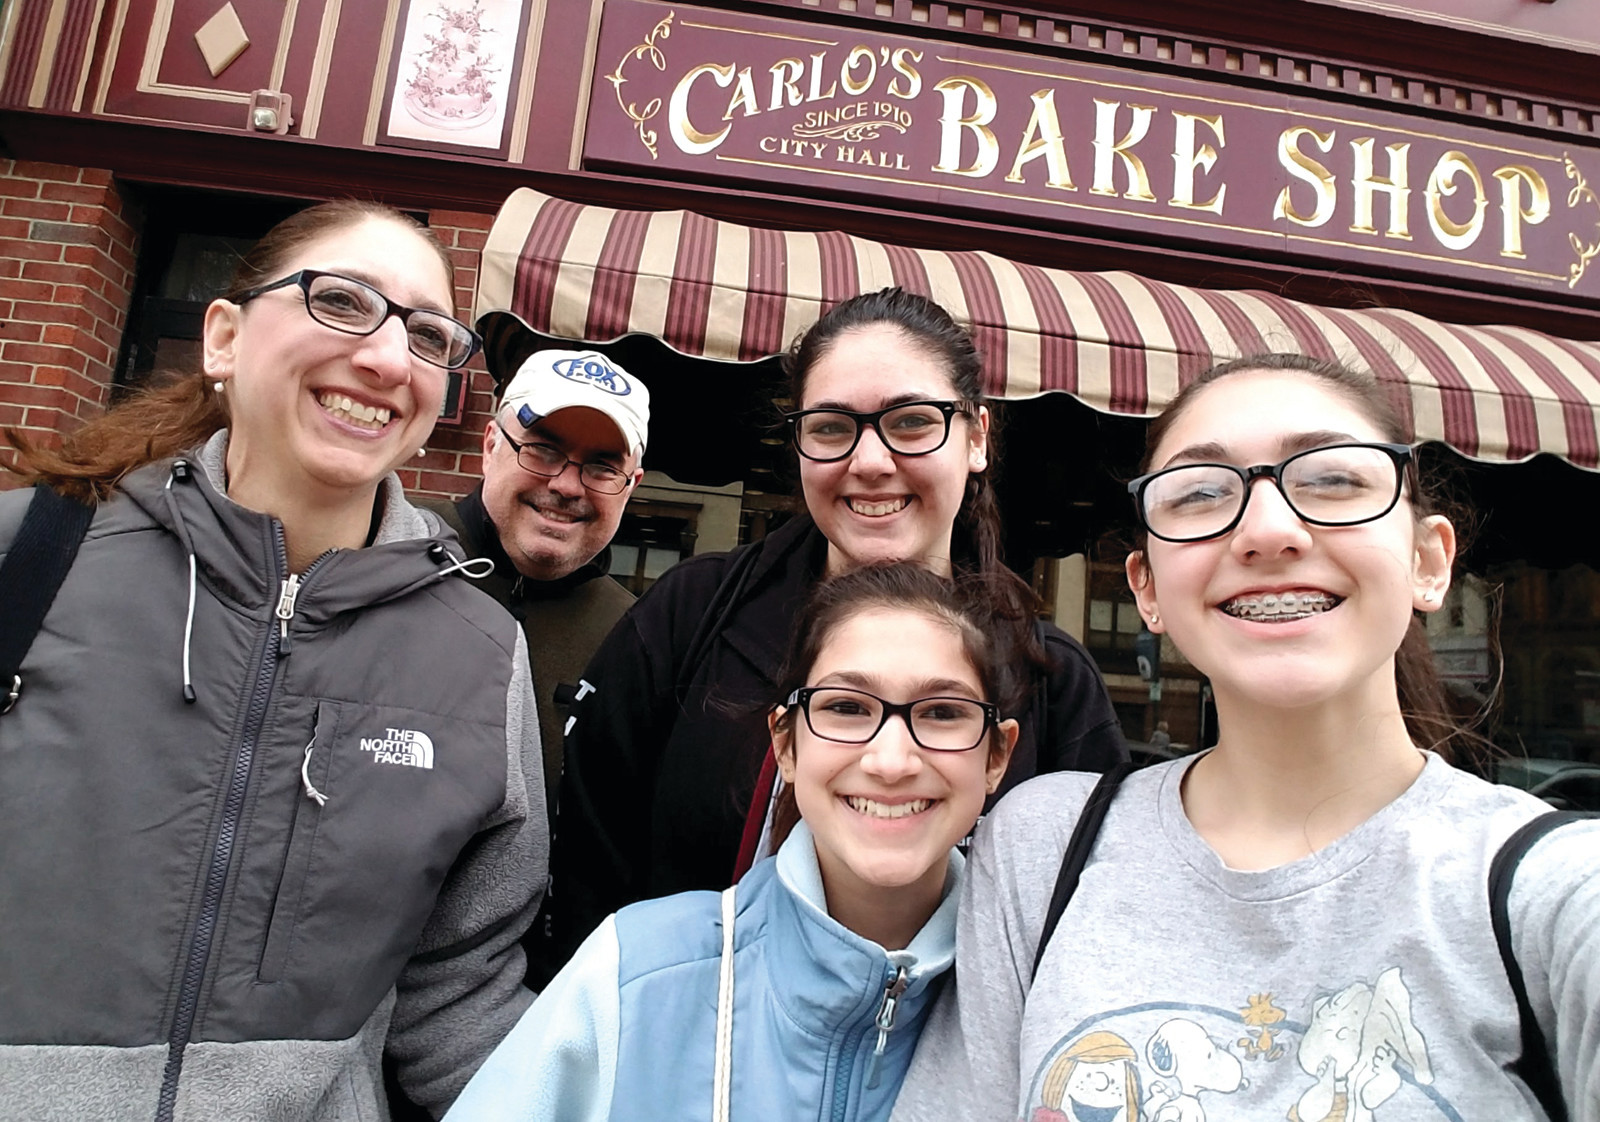 BIG FANS: A stop at the Hoboken bakery, Carlo's Bake Shop, the original location of television's hit show, "Cake Boss" was a great way to start out Day Two of our whirlwind trip. Despite finding a $45 parking ticket on our windshield when we got back to the car, we were still happy we made it a point to stop at the bakery where we all enjoyed some delicious sweet treats. We utilized some of our extra spending money, which had put aside for experiencing some of the local foods.